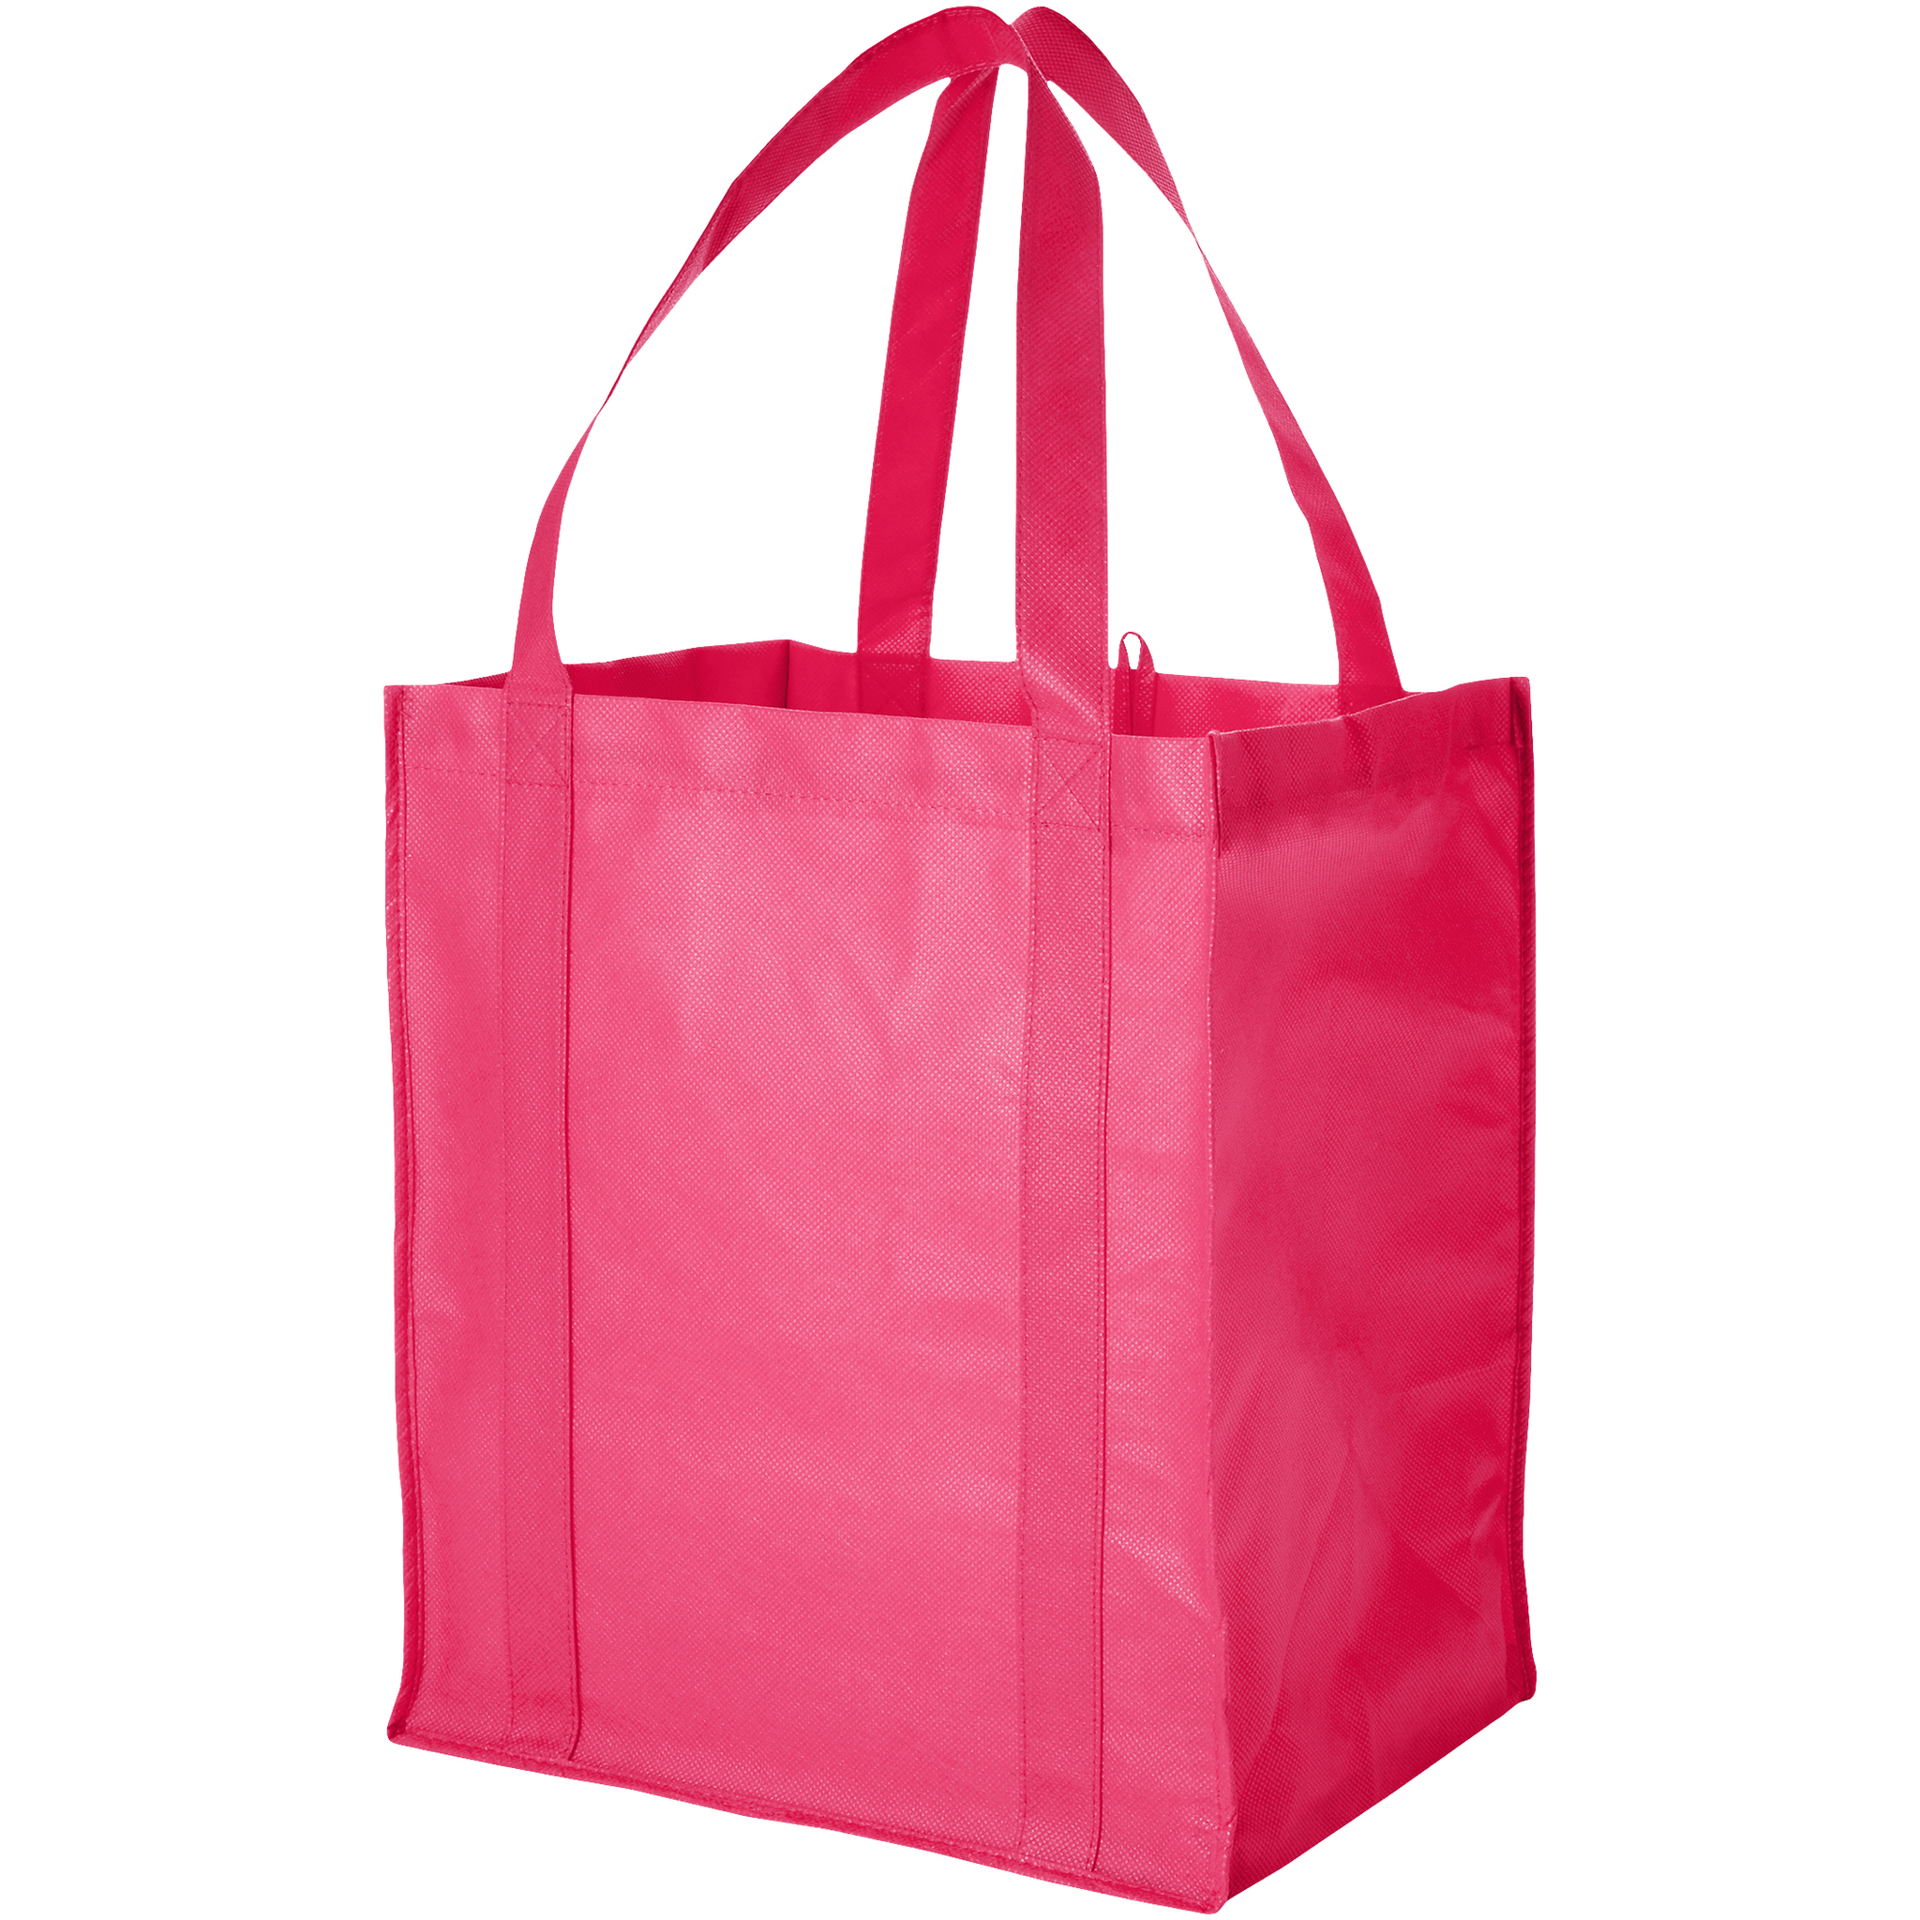 Magenta reusable shopping bag with reinforced handles